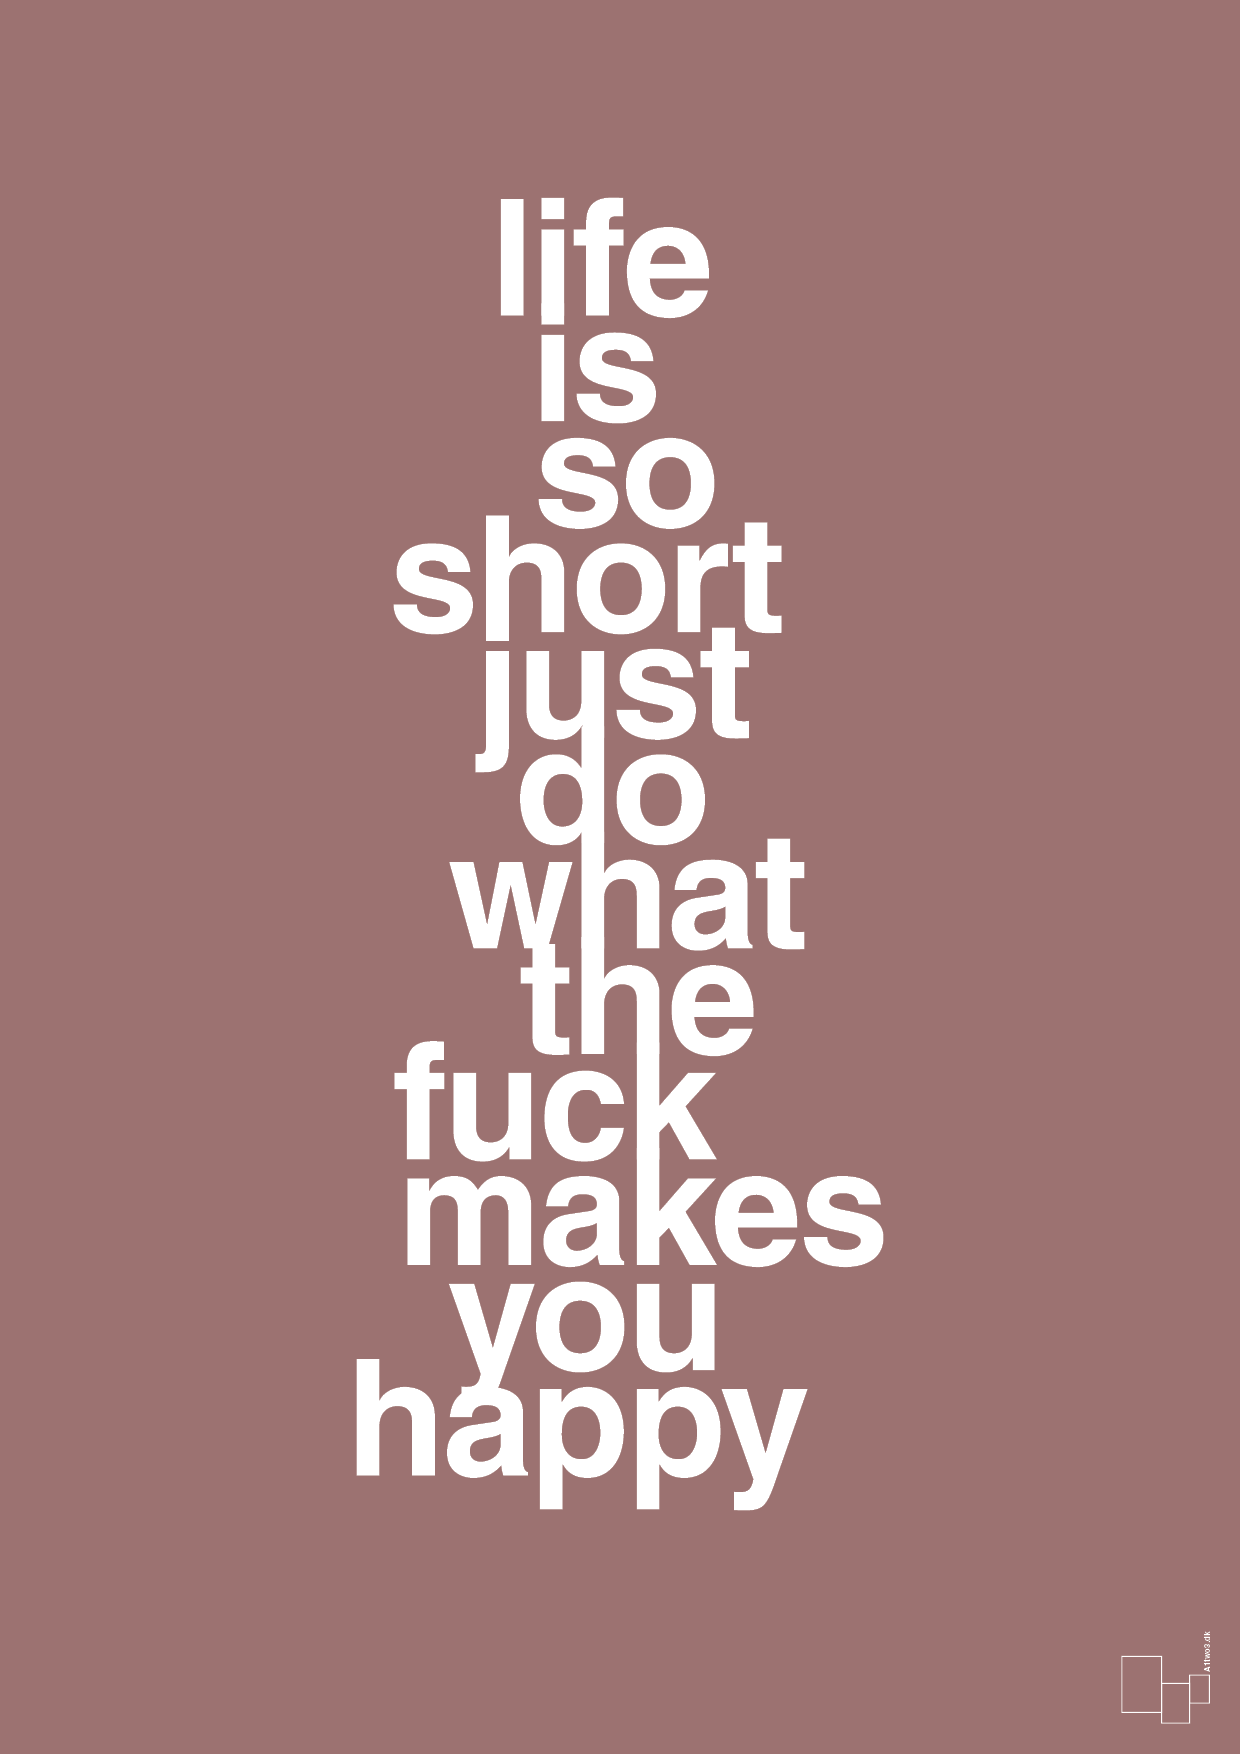 life is so short just do what the fuck makes you happy - Plakat med Ordsprog i Plum